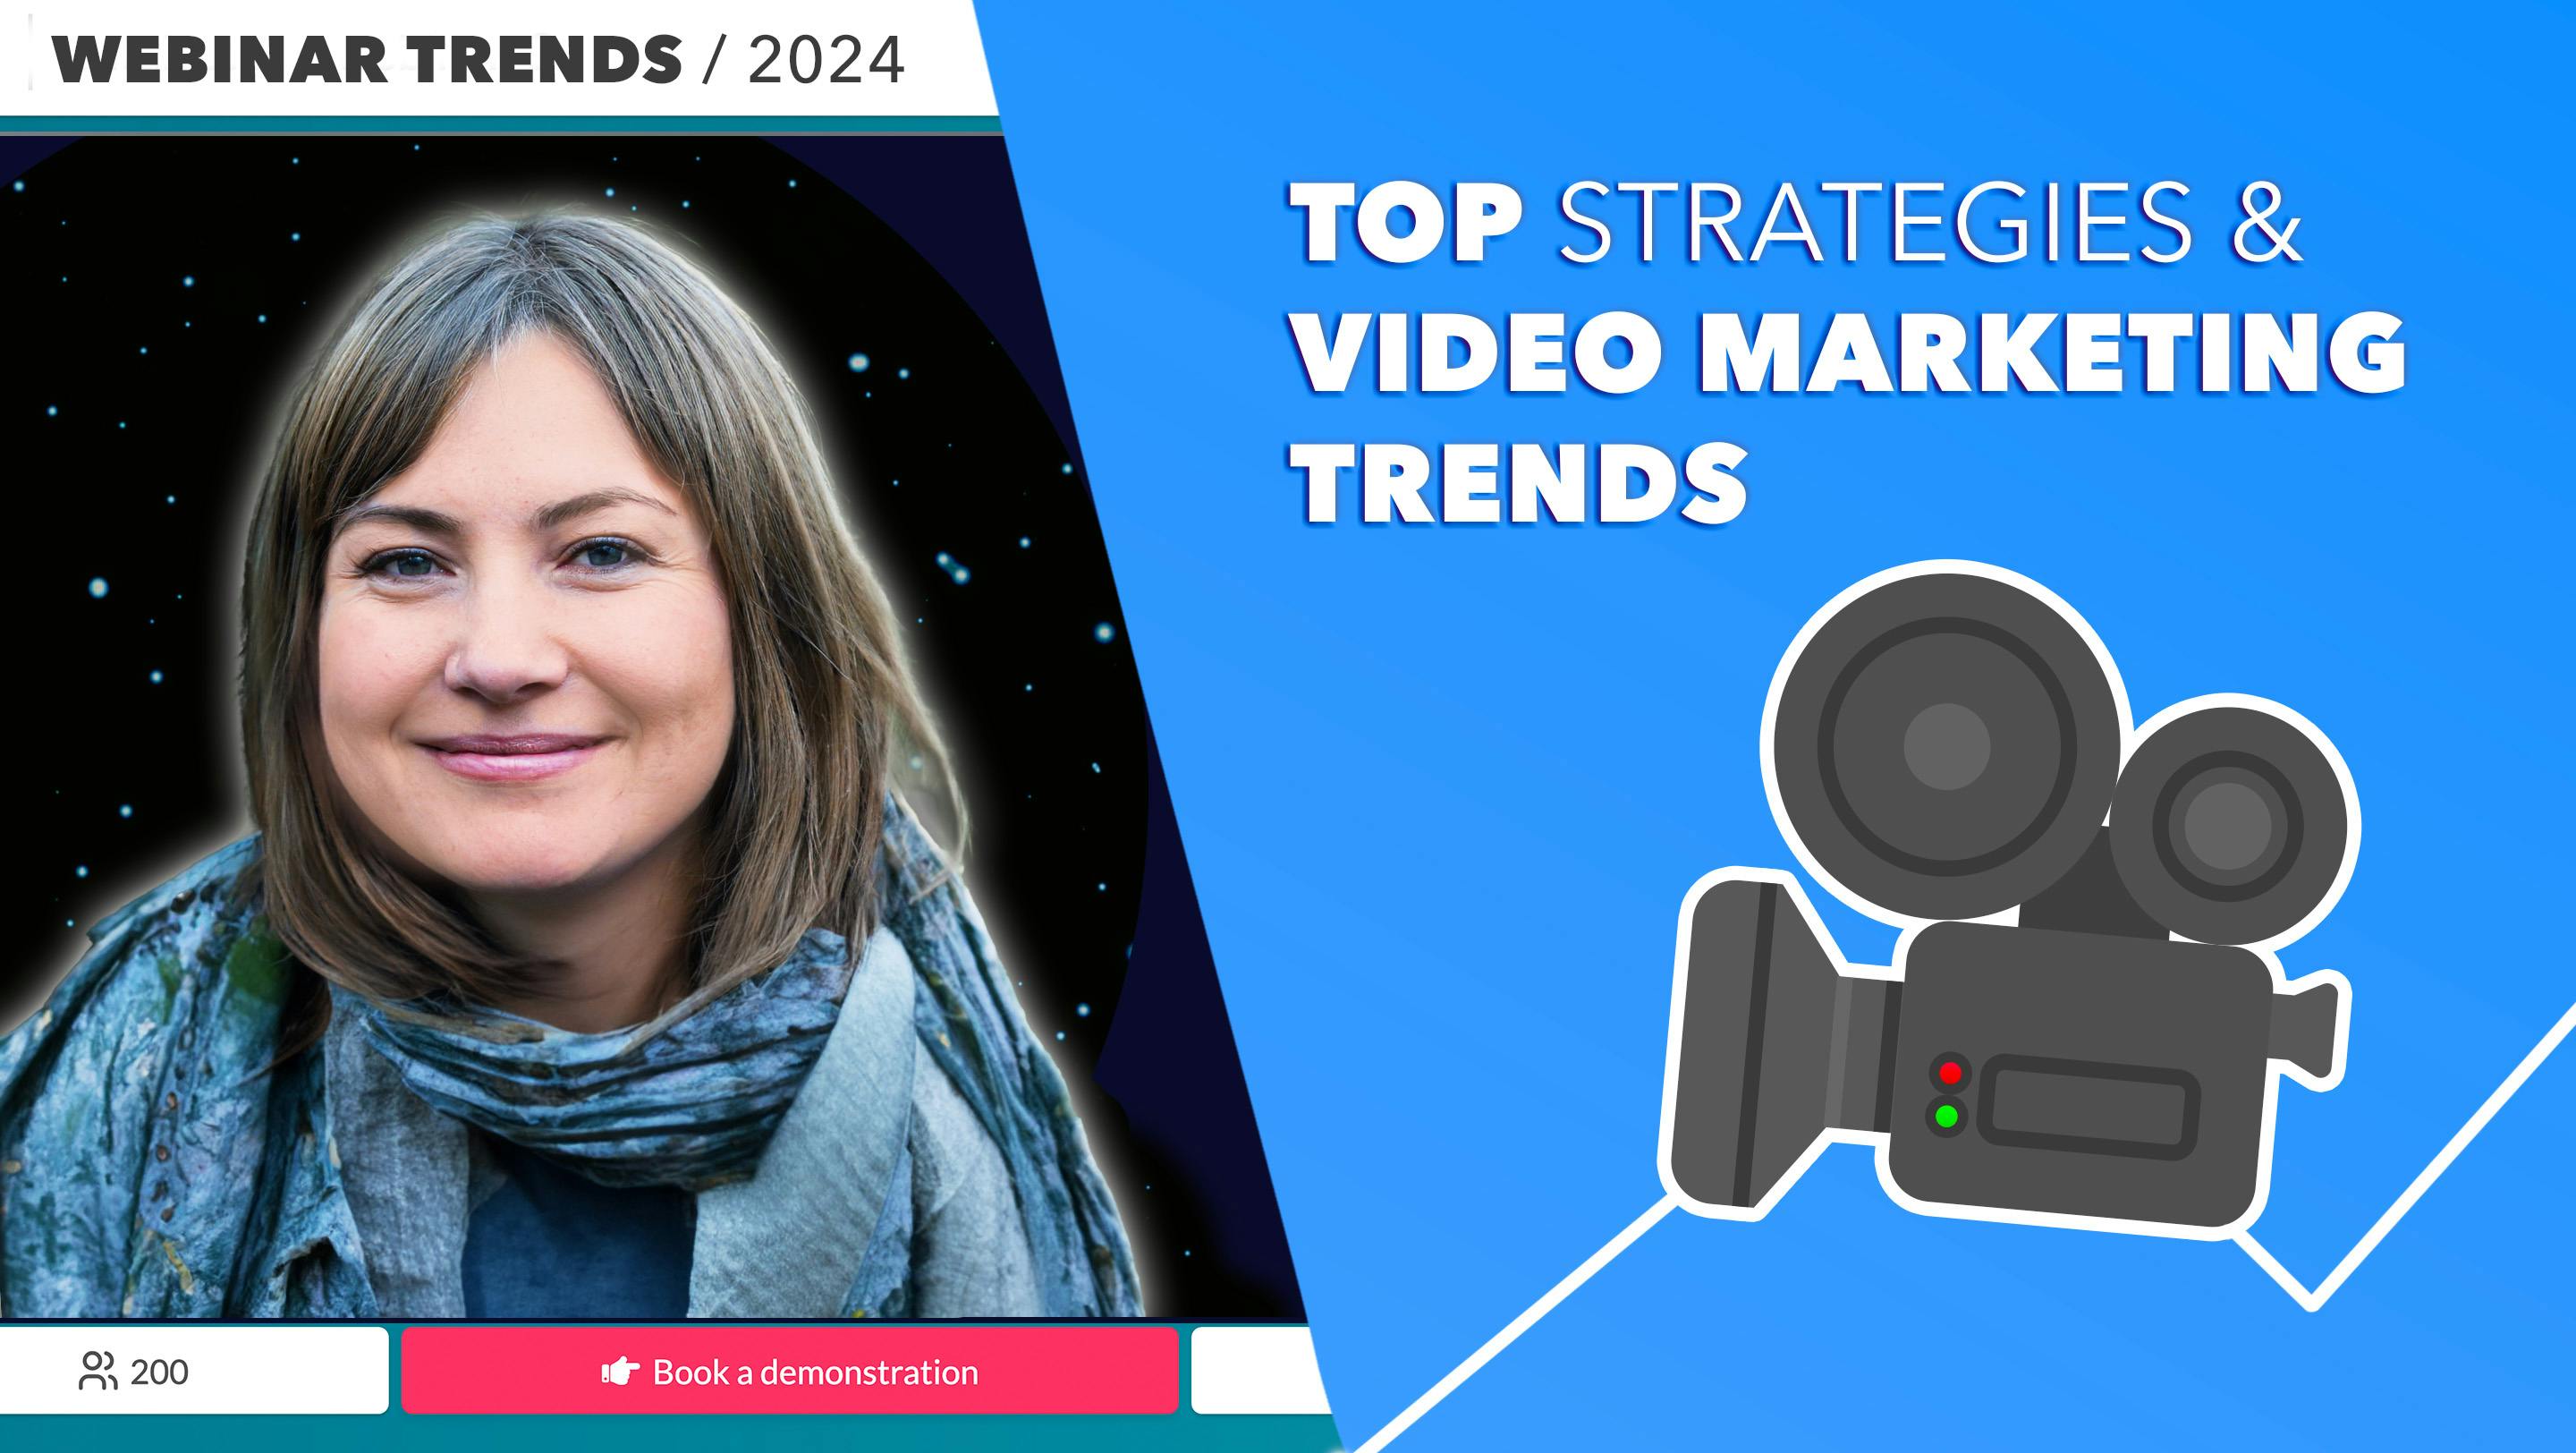 Top Webinar and Video Marketing Trends 2024